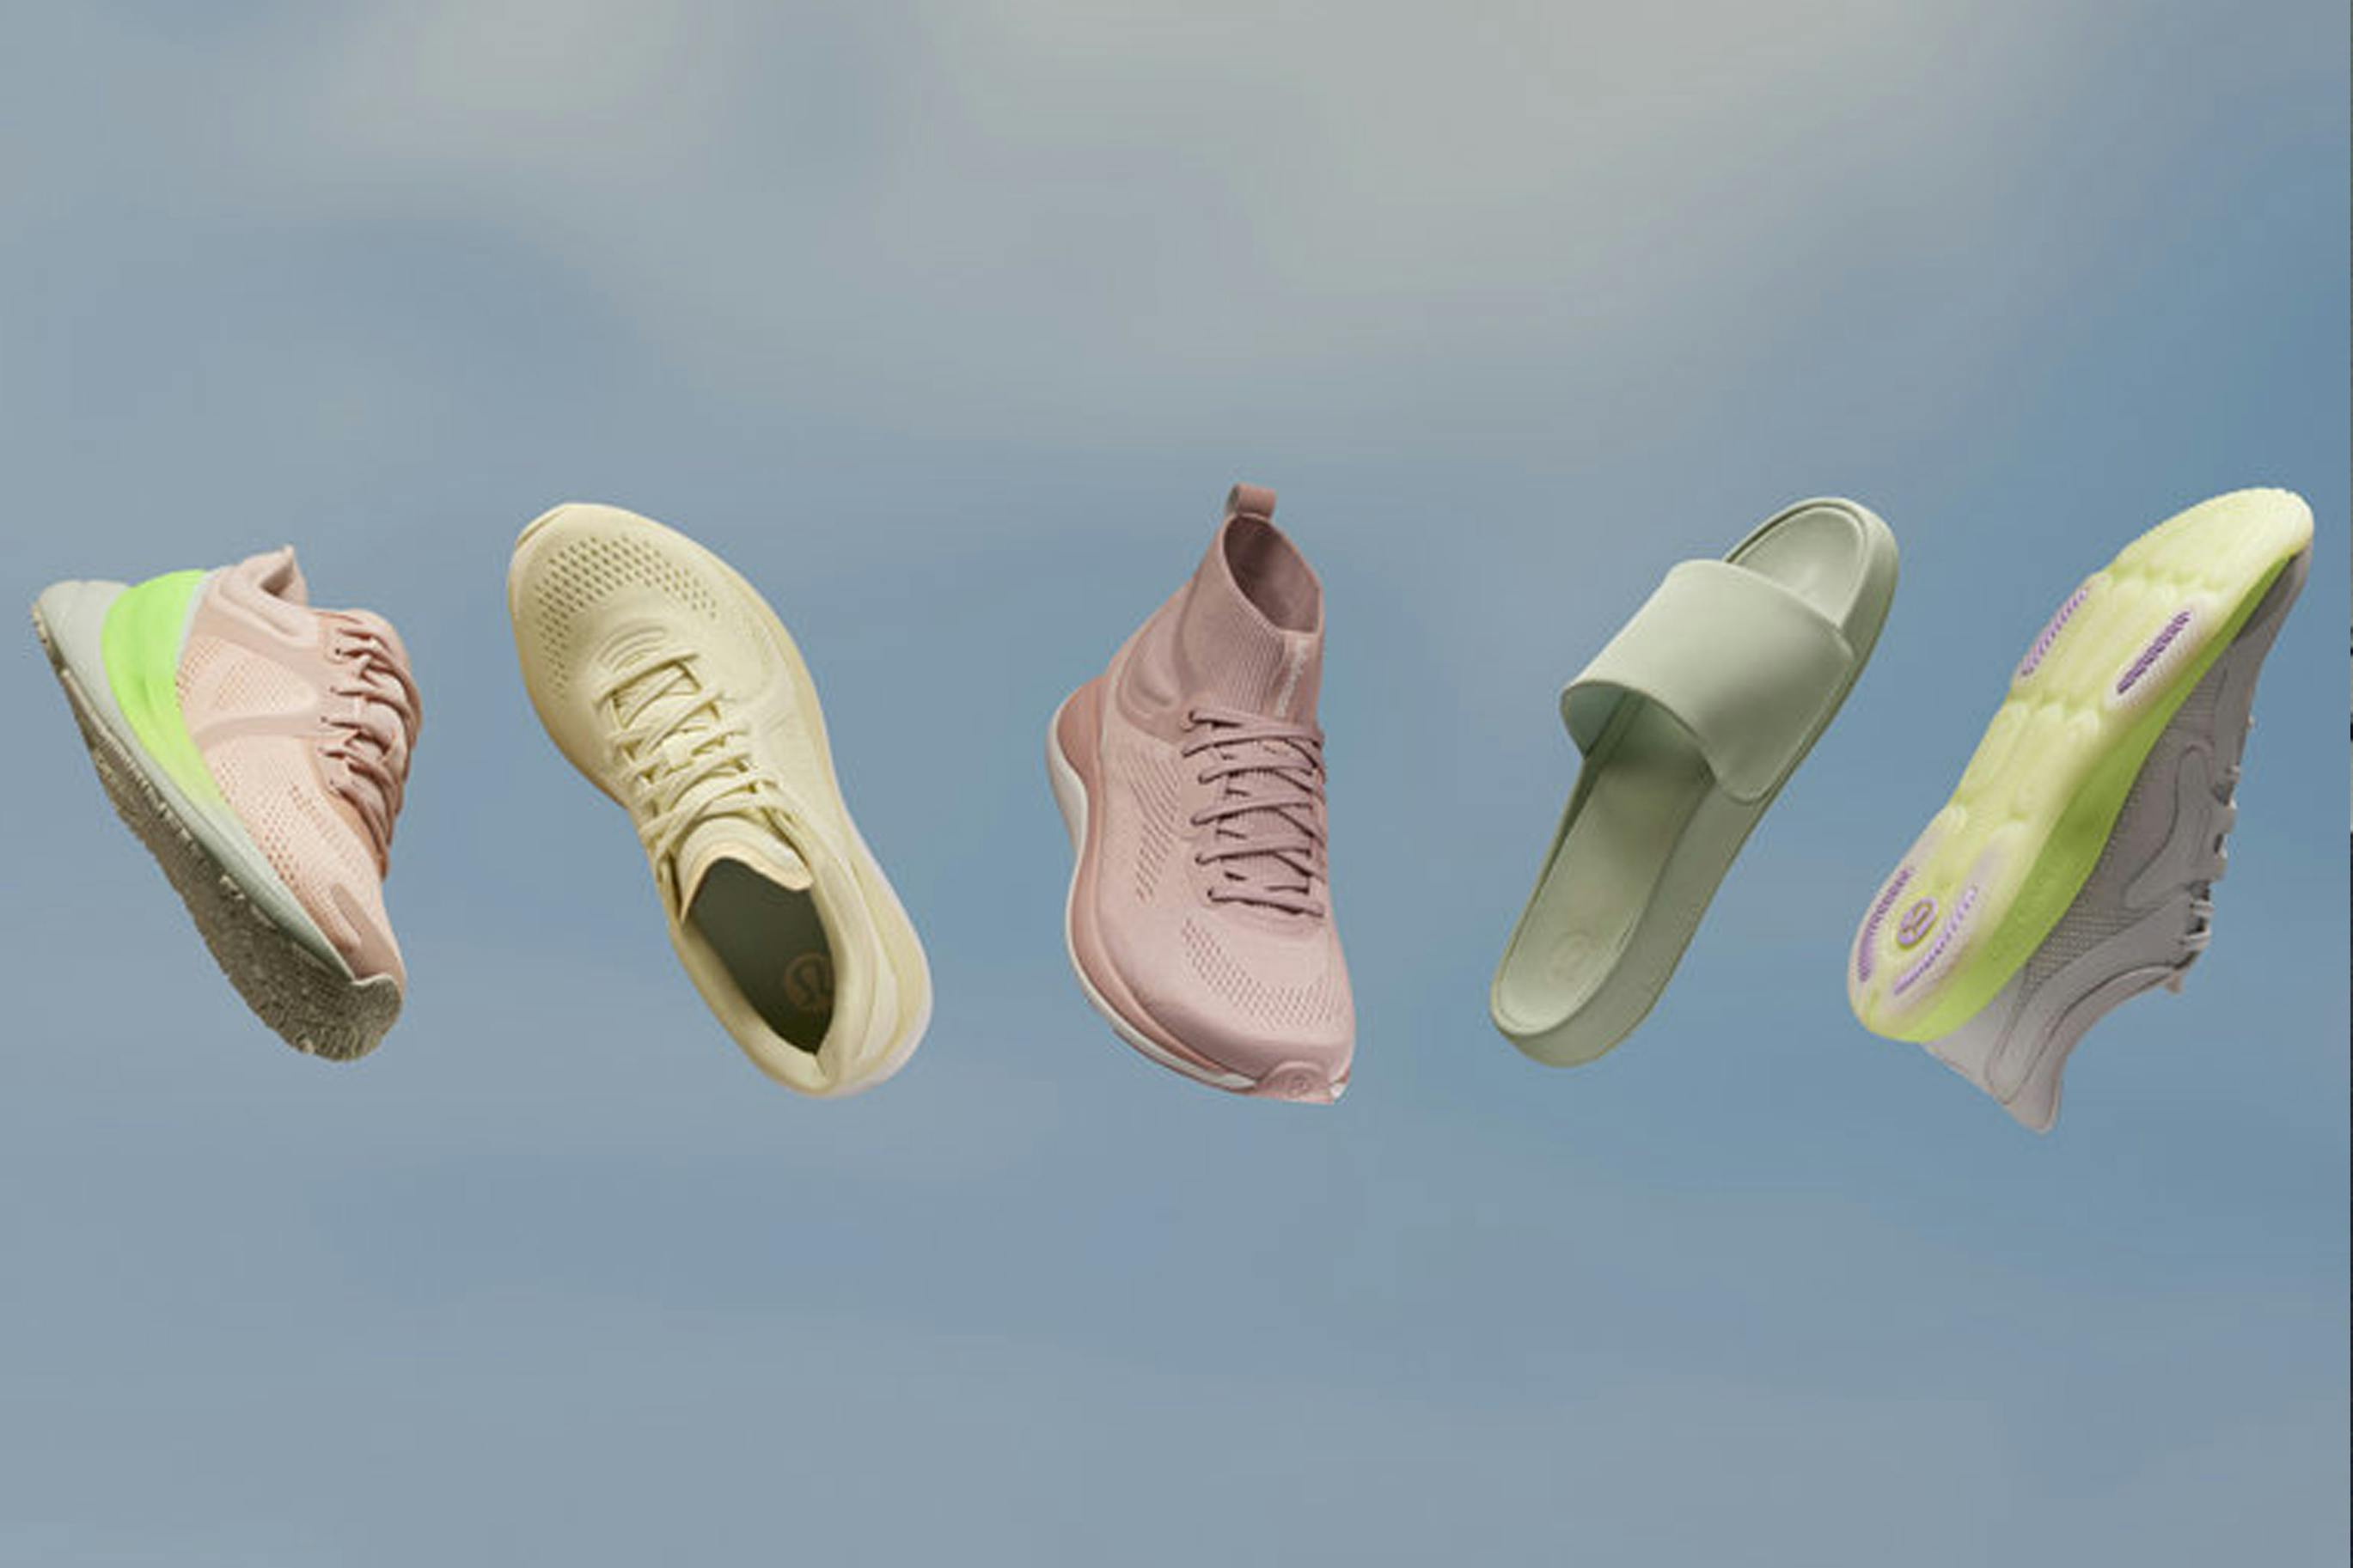 different shoes from lululemon floating on a sky background